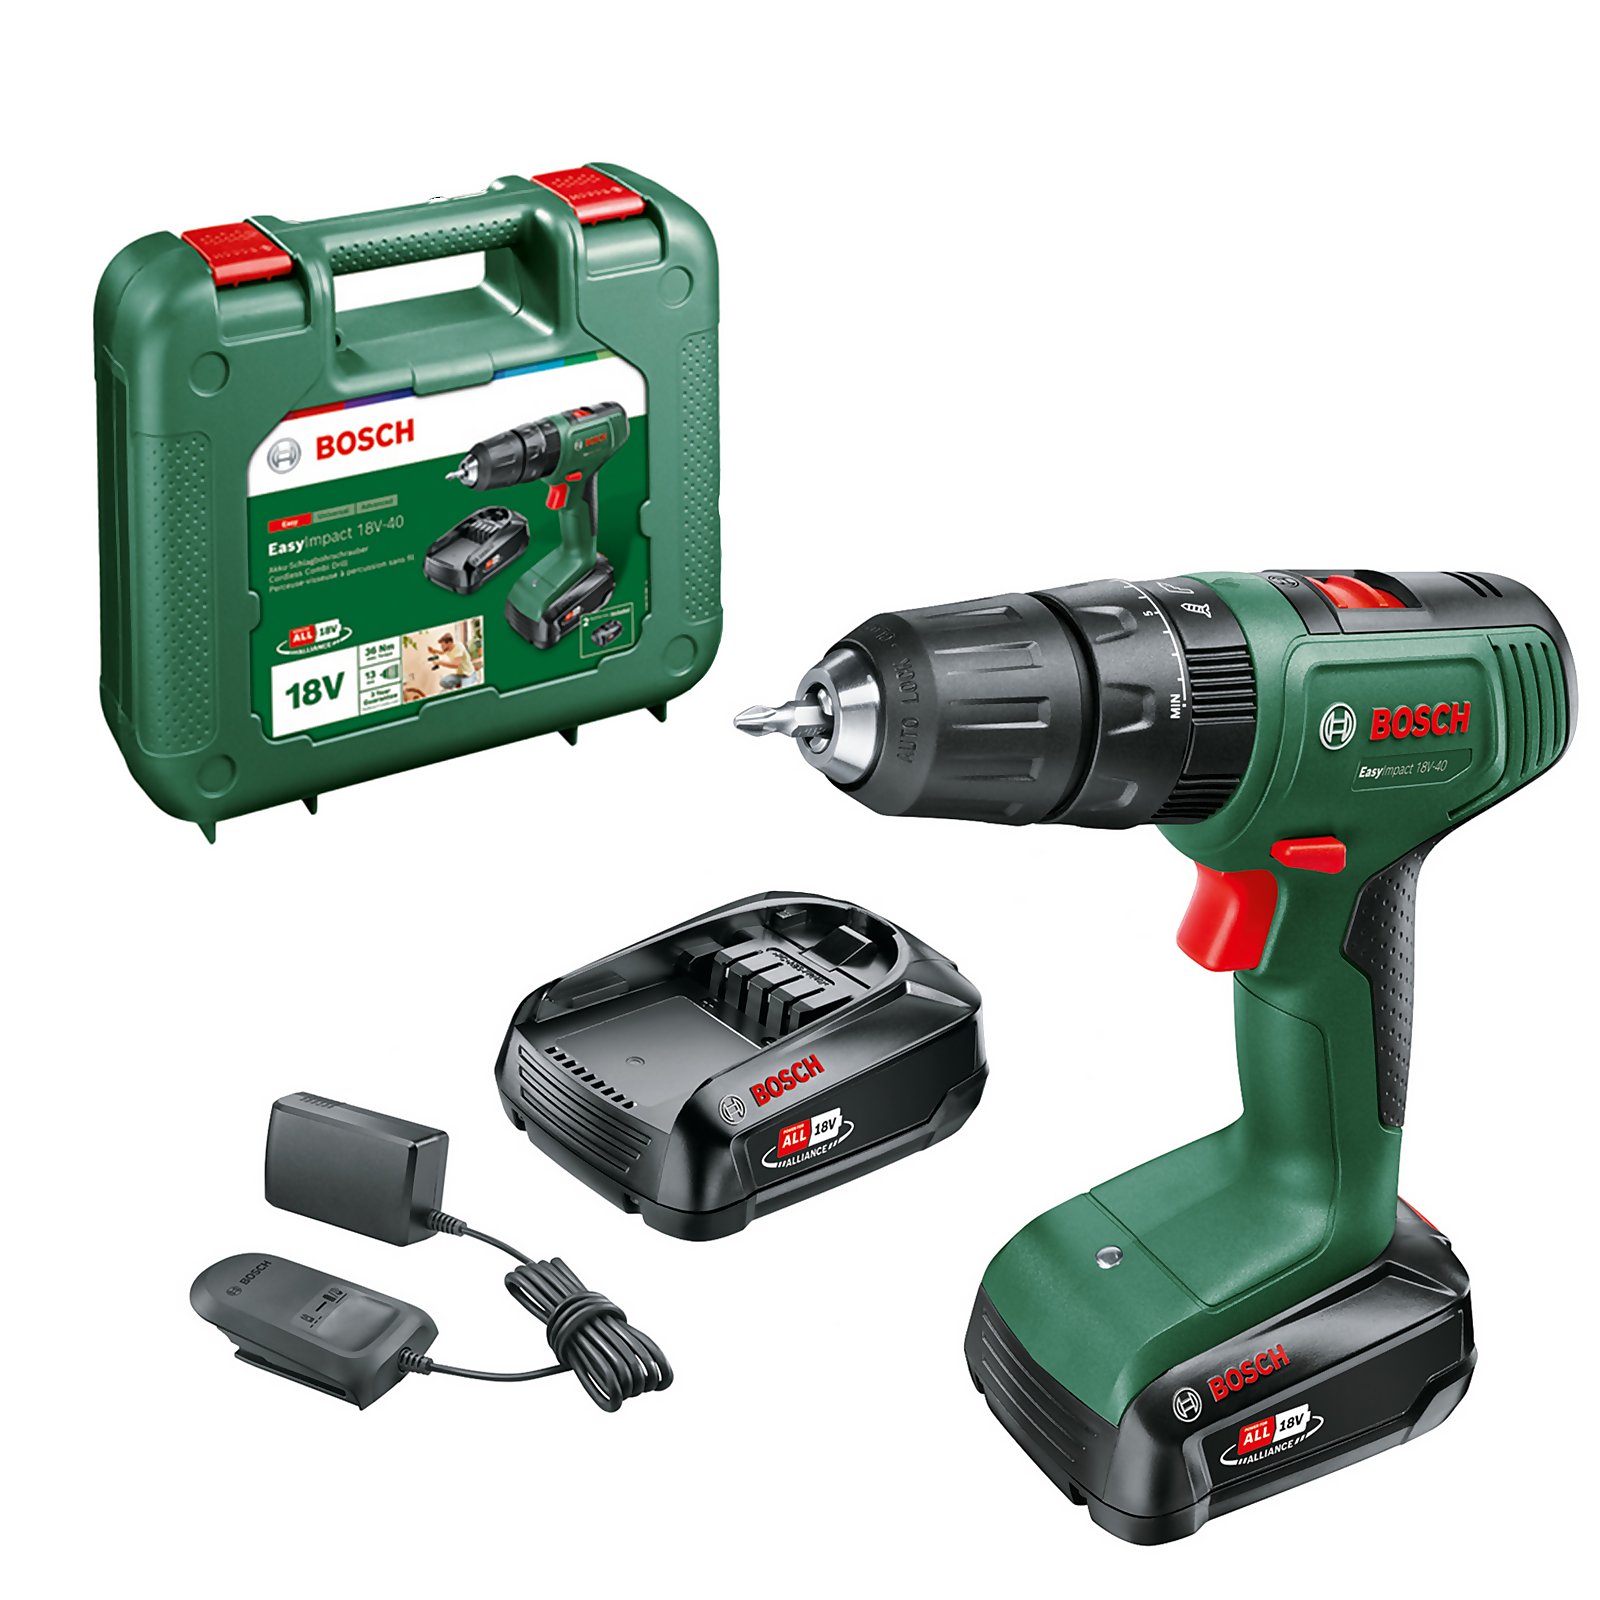 Photo of Bosch Easyimpact 18v-40 Combi Drill With 2x 1 5ah Batteries & Charger